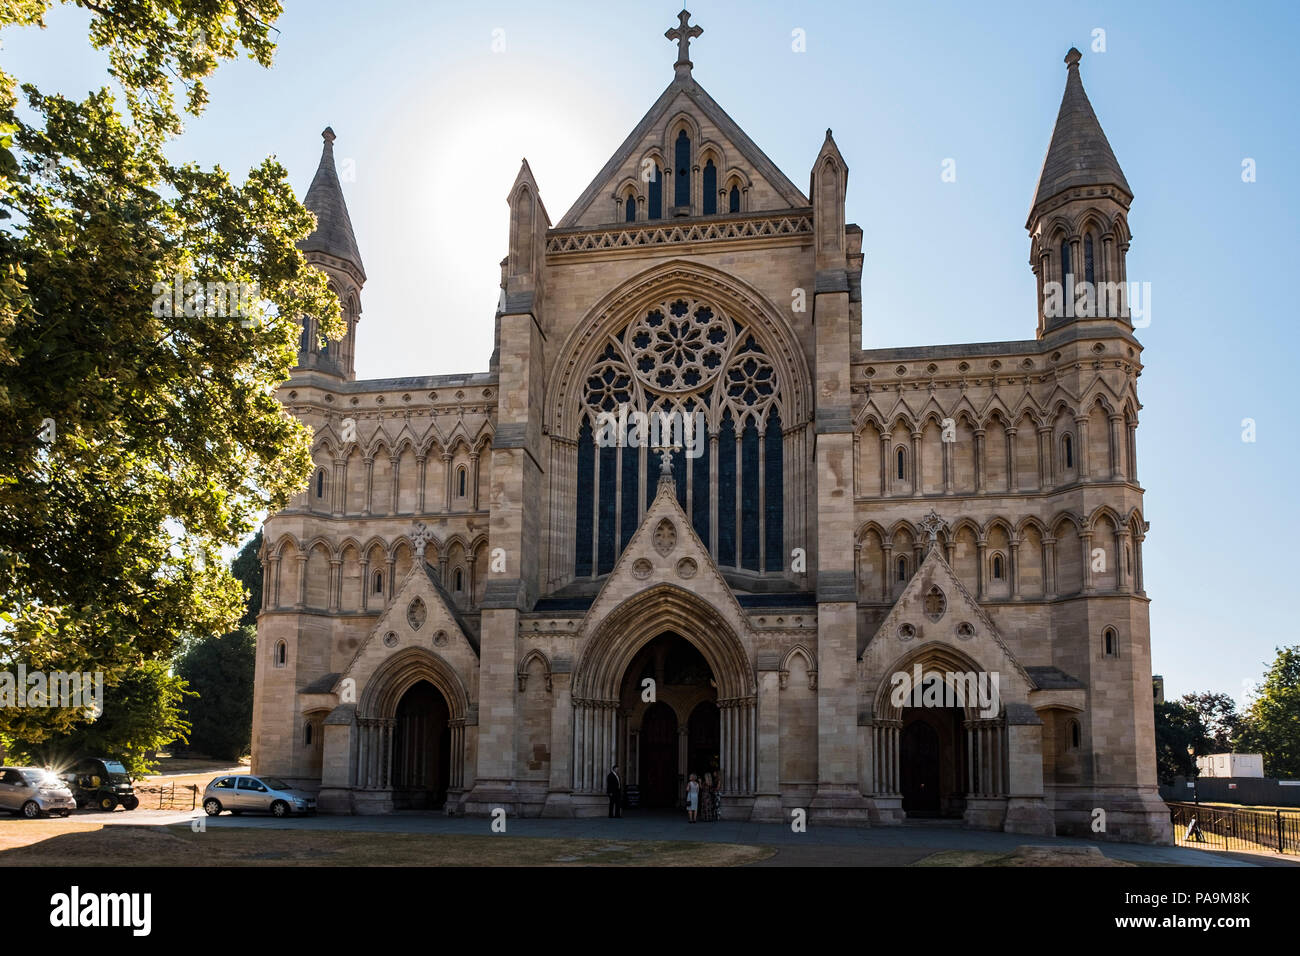 The Cathedral & Abbey Church of Saint Alban, St. Albans, Hertfordshire, England, U.K. Stock Photo